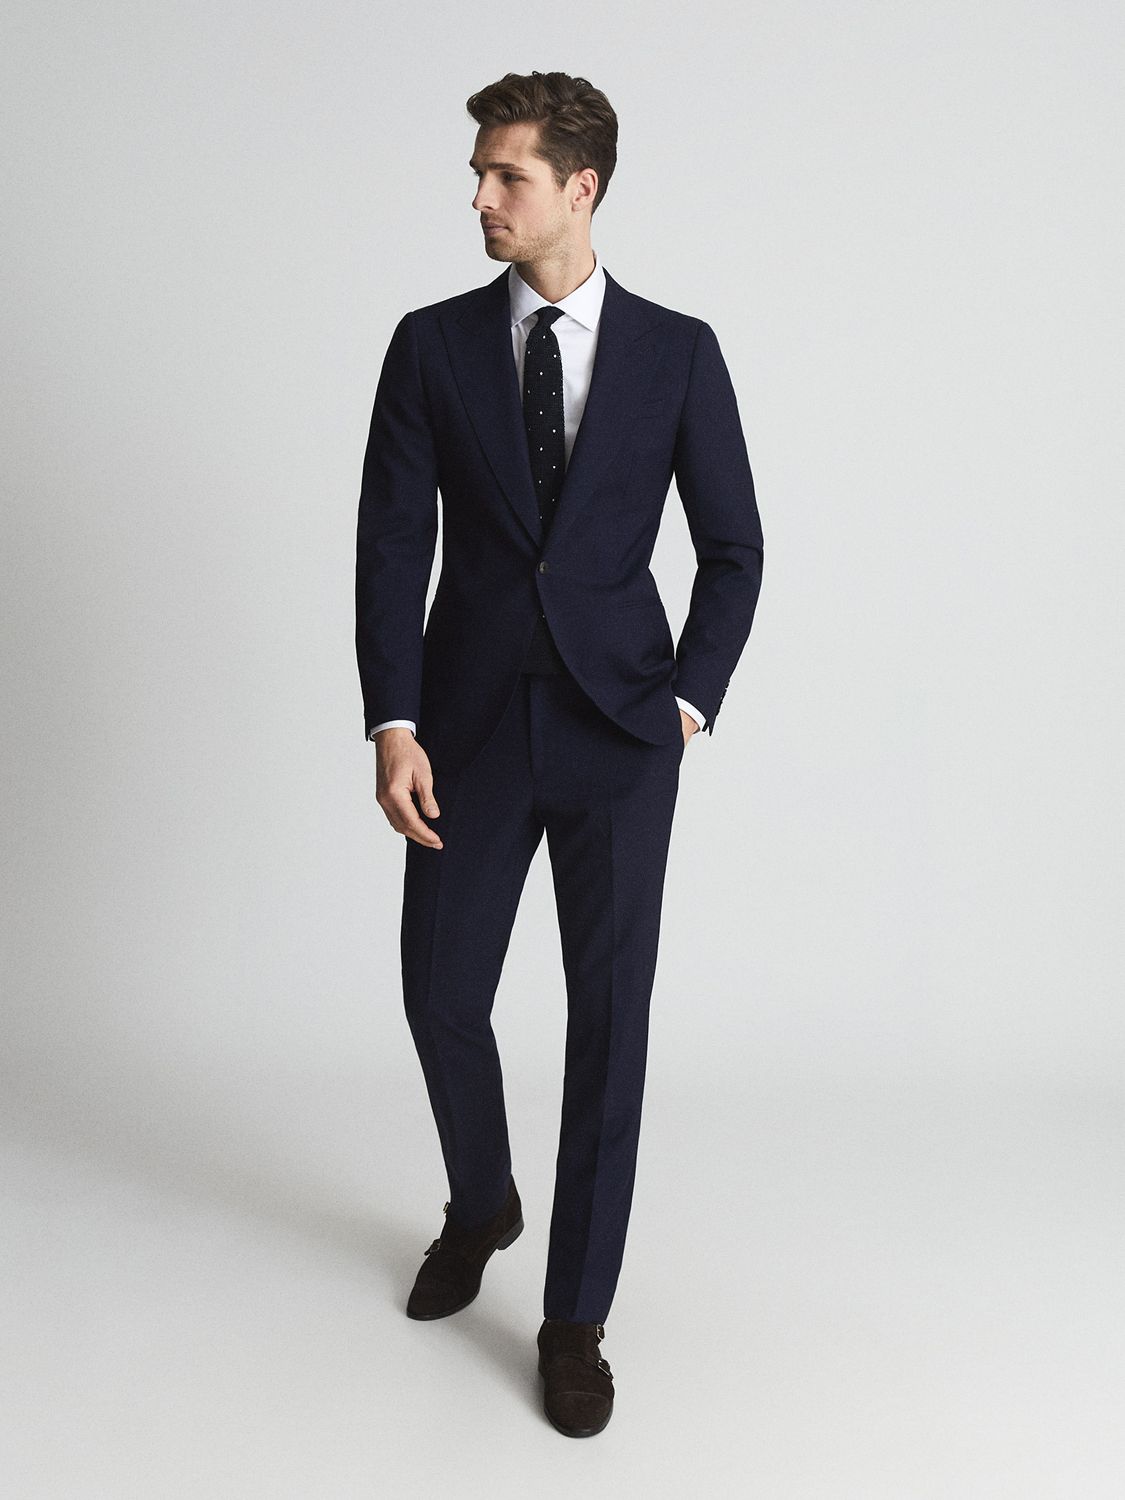 Reiss Bold Tailored Wool Suit Trousers, Navy